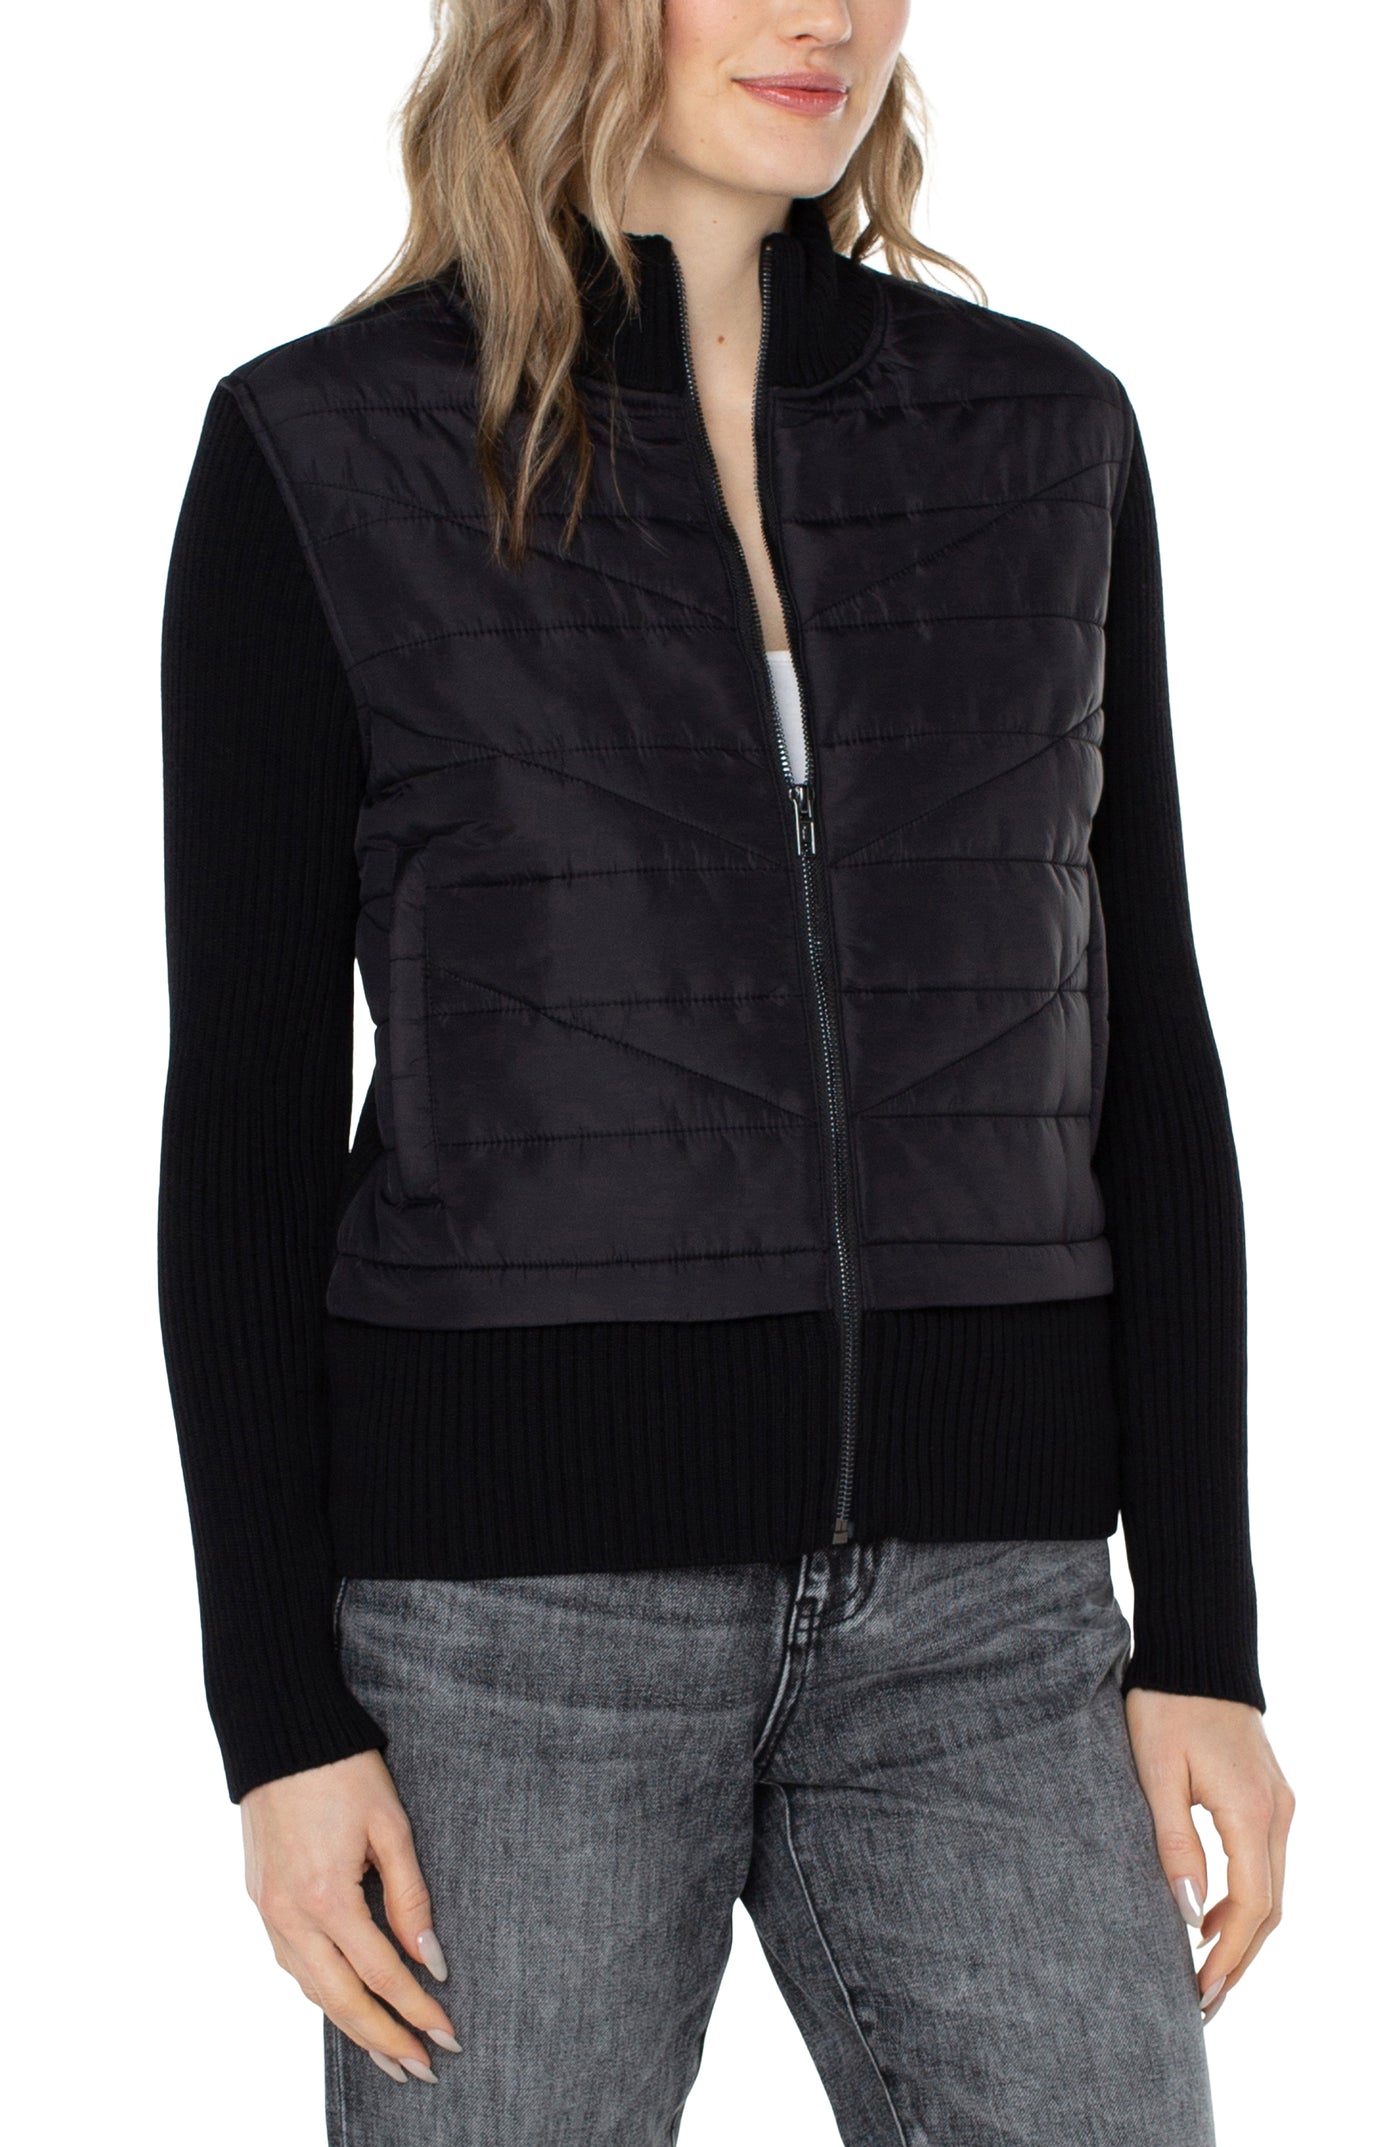 Quilted Front Full Zip Sweater